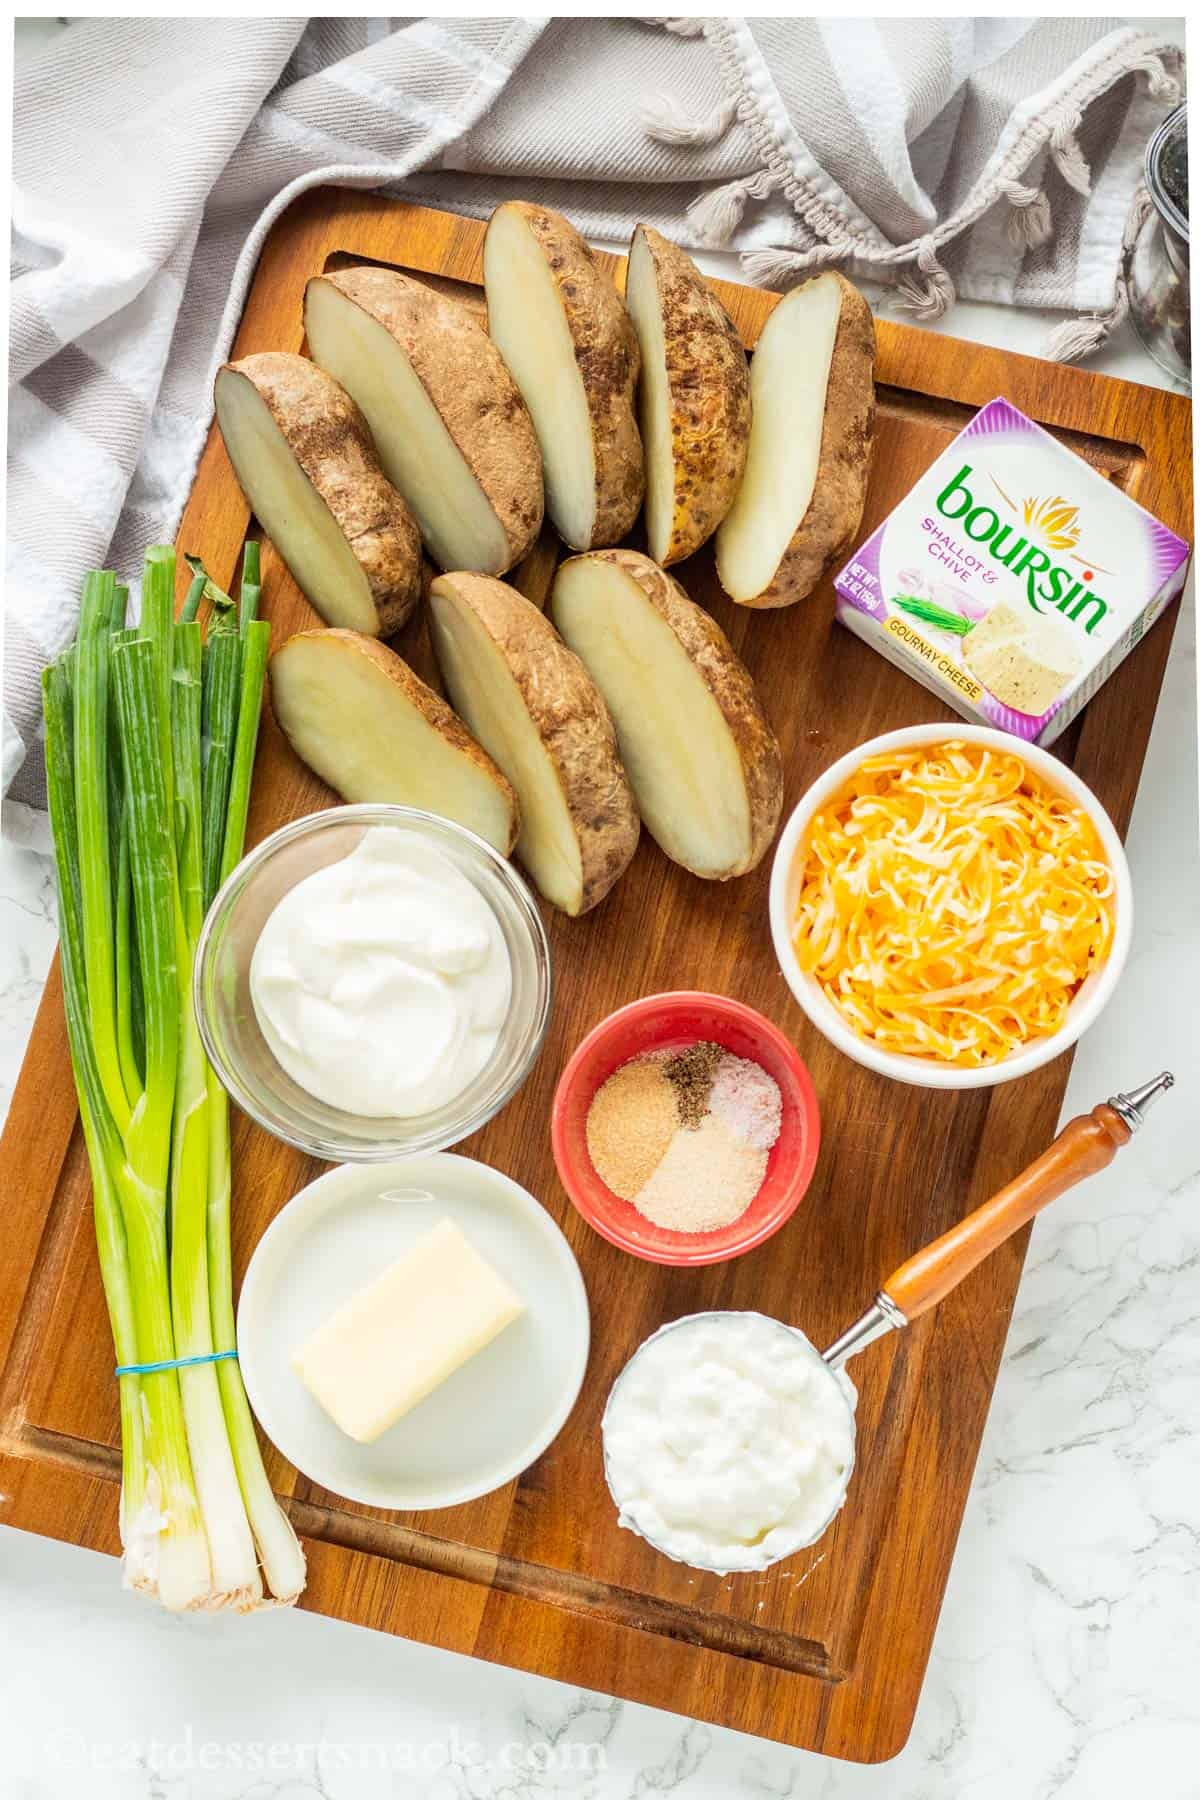 Green onions, sour cream, cottage cheese, cheddar and boursin cheese, potatoes and spices on cutting board.